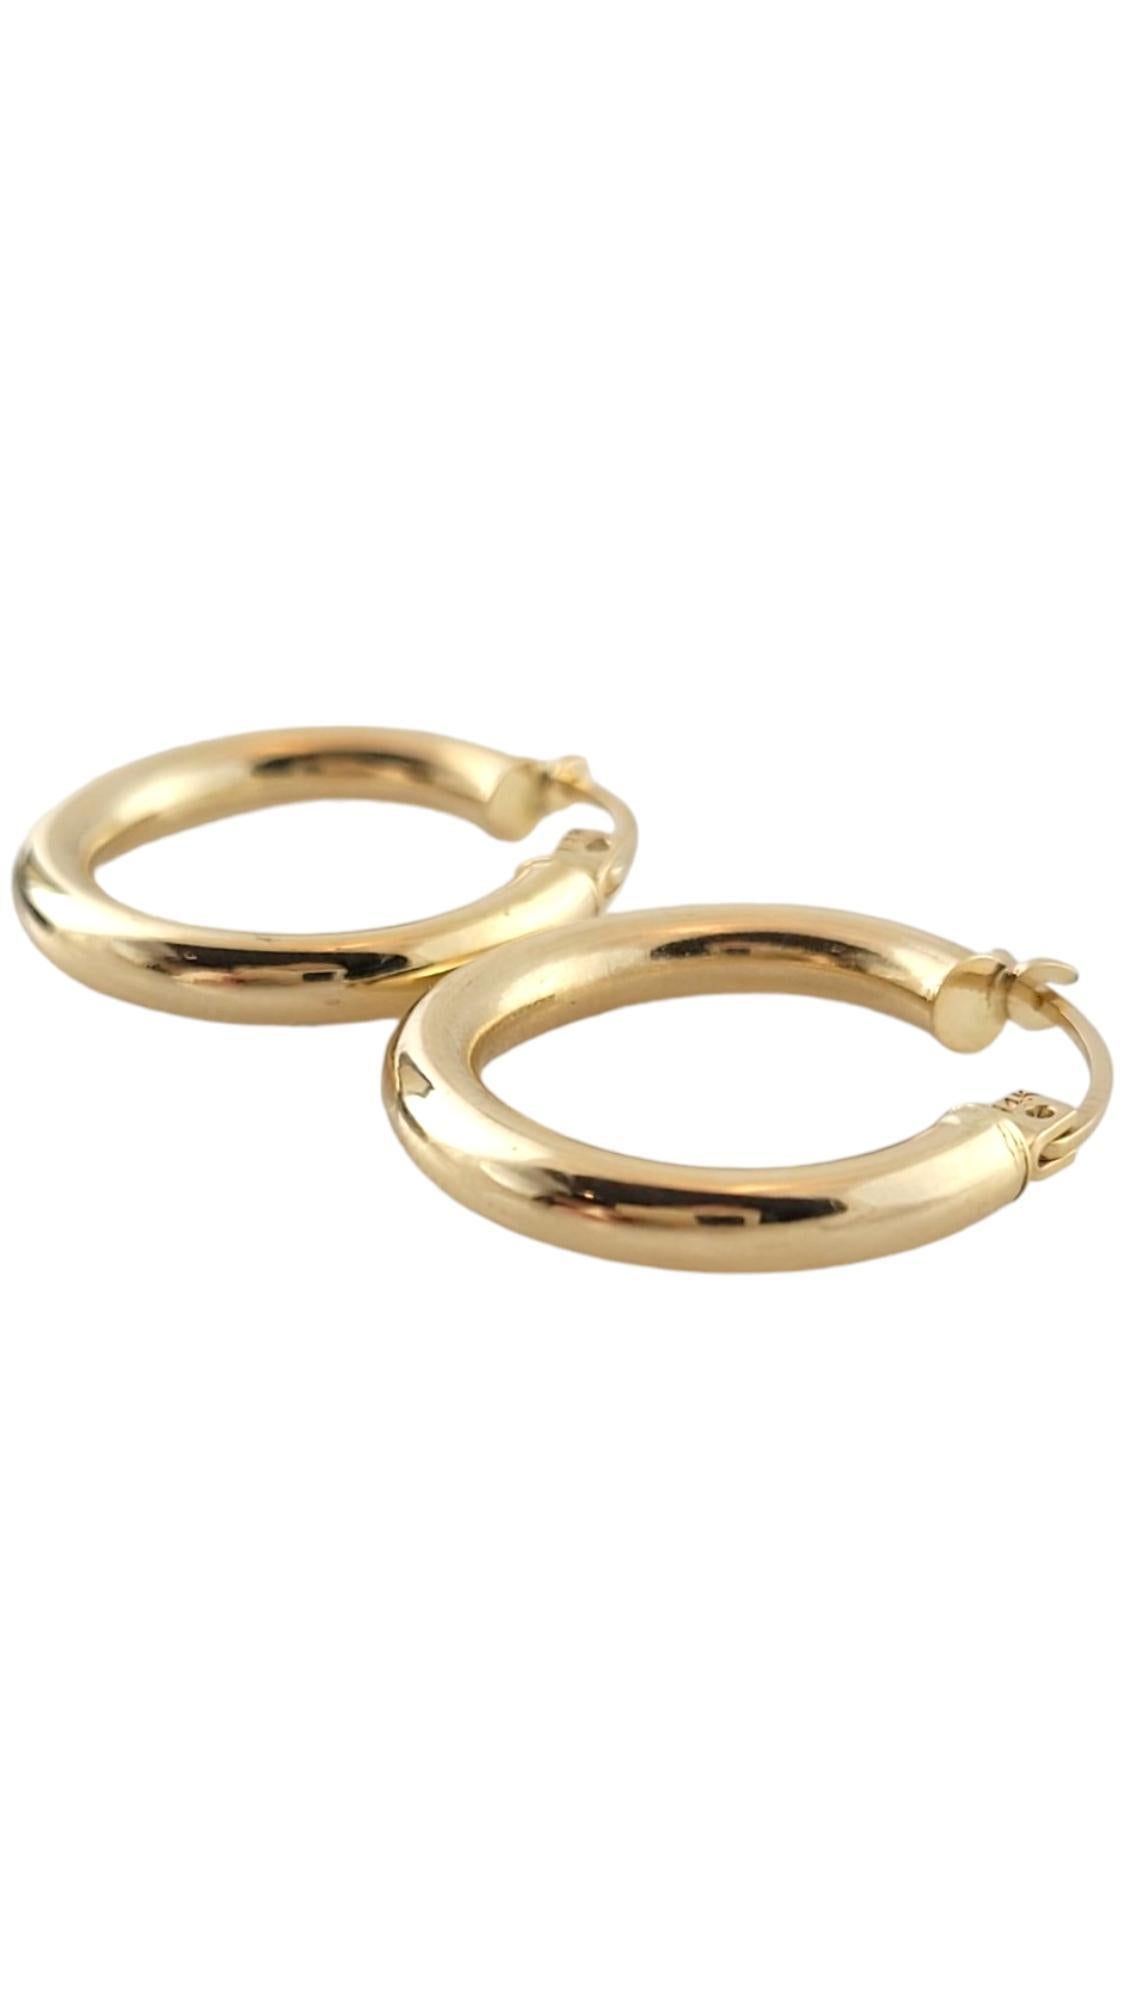 14K Yellow Gold Hoop Earrings

This gorgeous set of classic hoops are crafted from 14K yellow gold that will look amazing on anybody!

Diameter: 20.14mm
Width: 2.97mm

Weight: 1.20 dwt/ 1.87 g

Hallmark: AAI 14K

Very good condition, professionally